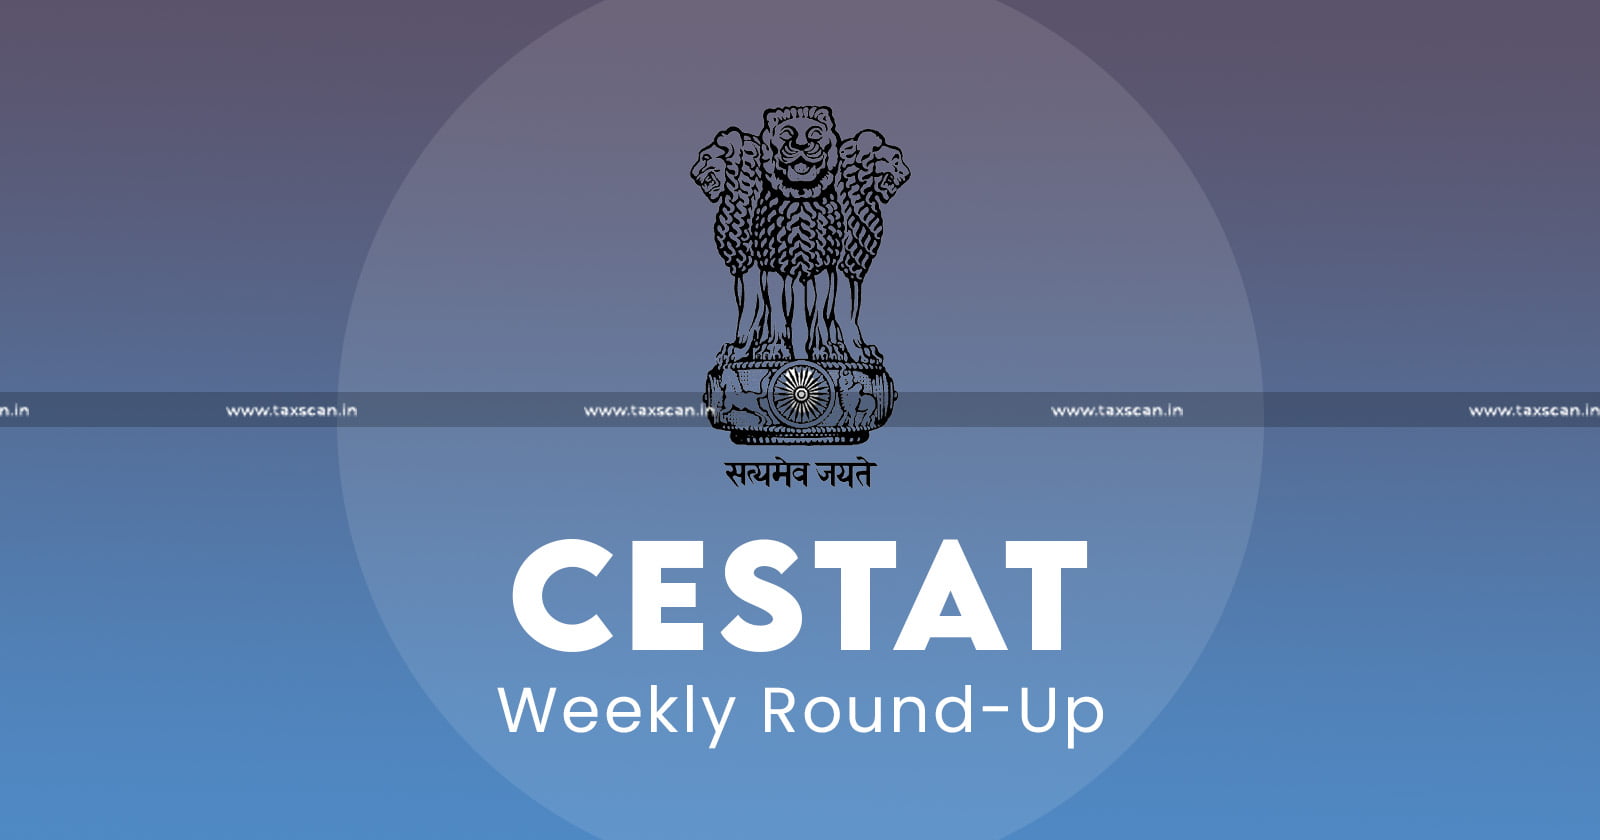 CESTAT Weekely Round-up - Weekely Round-up - Customs - Excise - Service Tax - taxscan